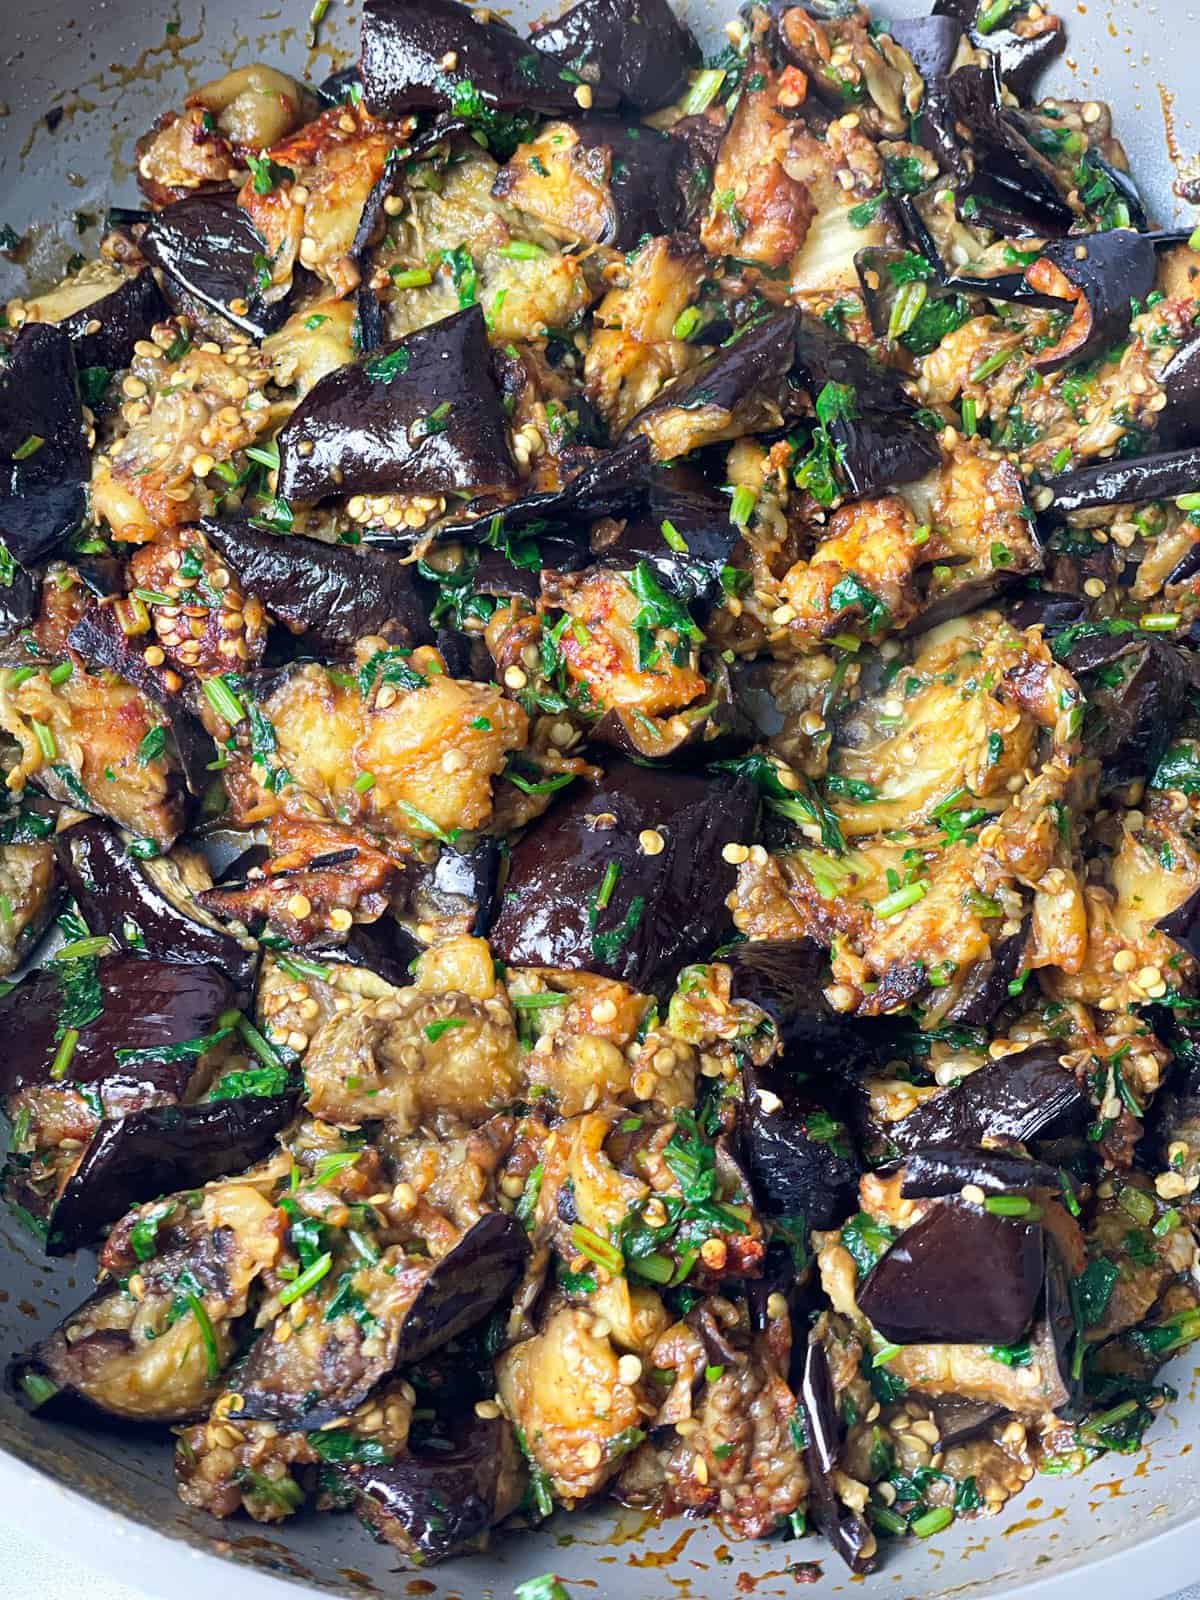 a pan of baked eggplants cut into cubes and sauteed with some cilantro and garlic